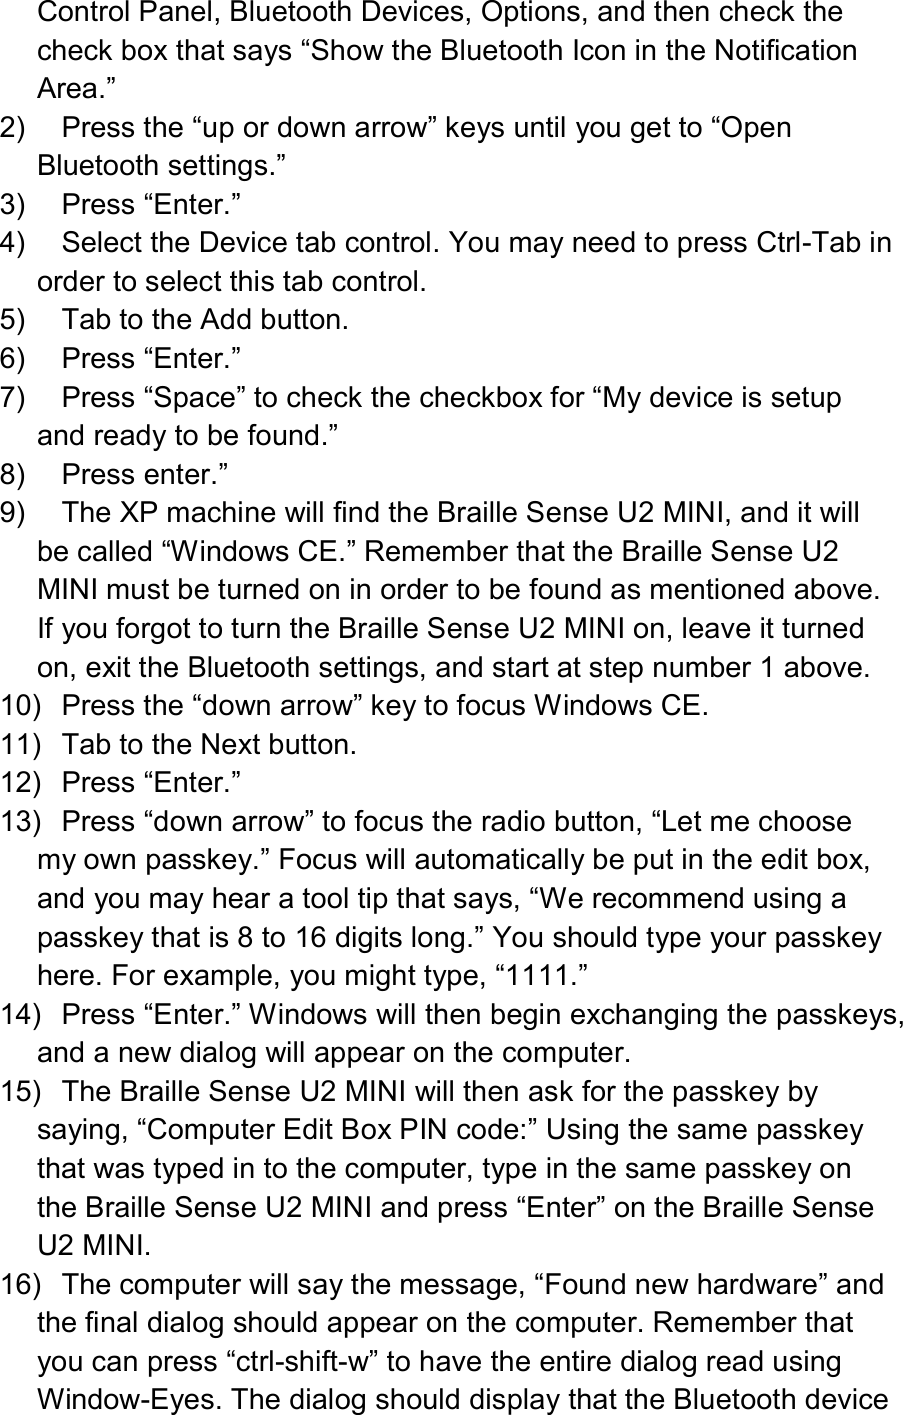  Control Panel, Bluetooth Devices, Options, and then check the check box that says “Show the Bluetooth Icon in the Notification Area.” 2)  Press the “up or down arrow” keys until you get to “Open Bluetooth settings.” 3)  Press “Enter.” 4)  Select the Device tab control. You may need to press Ctrl-Tab in order to select this tab control. 5)  Tab to the Add button. 6)  Press “Enter.” 7)  Press “Space” to check the checkbox for “My device is setup and ready to be found.” 8)  Press enter.” 9)  The XP machine will find the Braille Sense U2 MINI, and it will be called “Windows CE.” Remember that the Braille Sense U2 MINI must be turned on in order to be found as mentioned above. If you forgot to turn the Braille Sense U2 MINI on, leave it turned on, exit the Bluetooth settings, and start at step number 1 above. 10)  Press the “down arrow” key to focus Windows CE. 11)  Tab to the Next button. 12)  Press “Enter.” 13)  Press “down arrow” to focus the radio button, “Let me choose my own passkey.” Focus will automatically be put in the edit box, and you may hear a tool tip that says, “We recommend using a passkey that is 8 to 16 digits long.” You should type your passkey here. For example, you might type, “1111.” 14)  Press “Enter.” Windows will then begin exchanging the passkeys, and a new dialog will appear on the computer. 15)  The Braille Sense U2 MINI will then ask for the passkey by saying, “Computer Edit Box PIN code:” Using the same passkey that was typed in to the computer, type in the same passkey on the Braille Sense U2 MINI and press “Enter” on the Braille Sense U2 MINI. 16)  The computer will say the message, “Found new hardware” and the final dialog should appear on the computer. Remember that you can press “ctrl-shift-w” to have the entire dialog read using Window-Eyes. The dialog should display that the Bluetooth device 